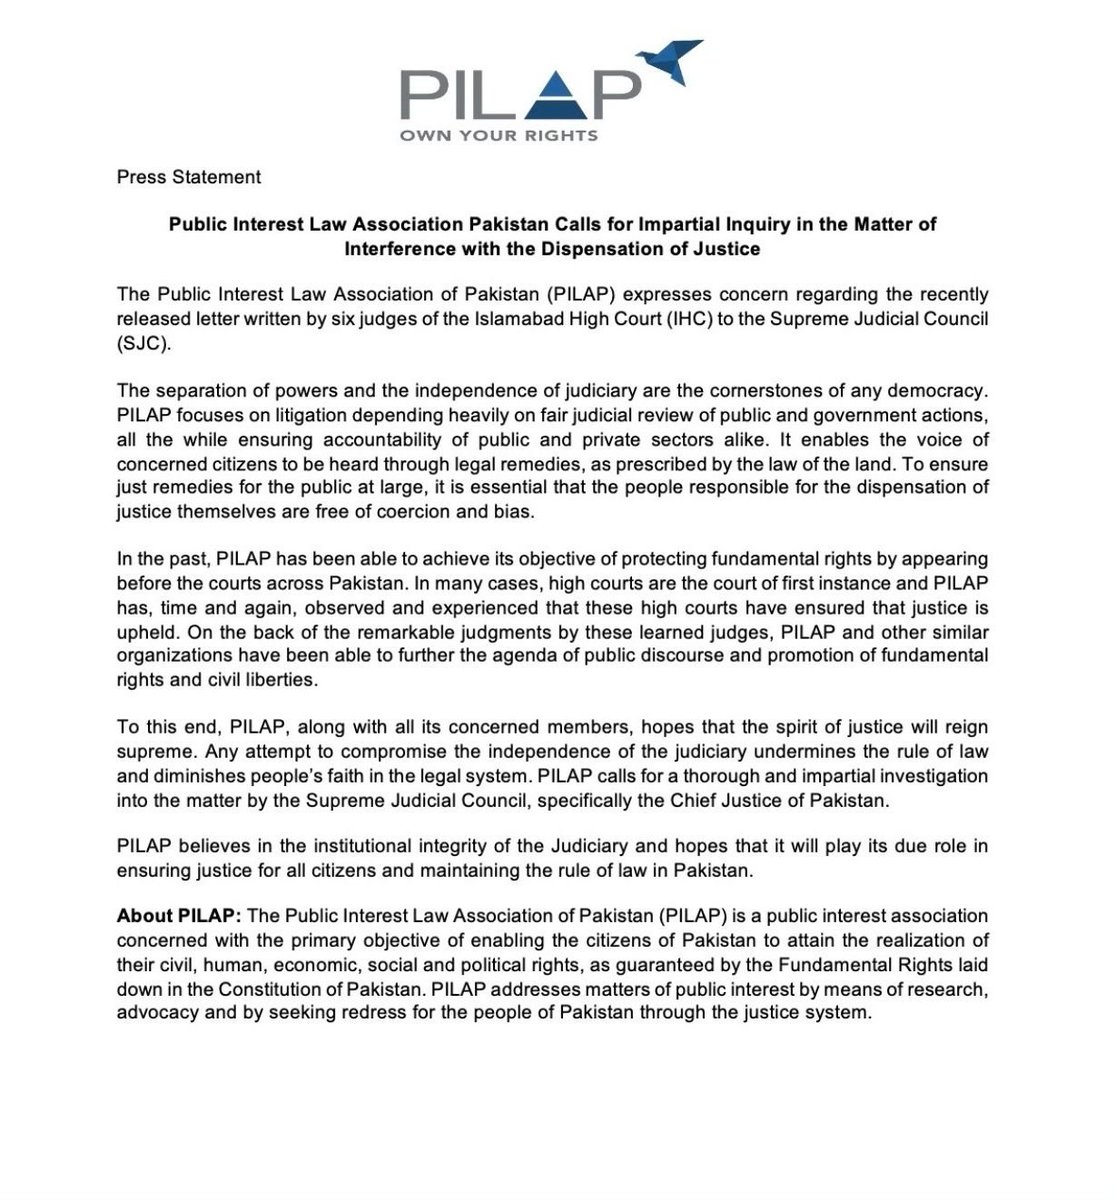 📢 PILAP calls for an impartial inquiry in the matter of interference with the dispensation of justice. ⚖️ 🔗: brecorder.com/news/40296313